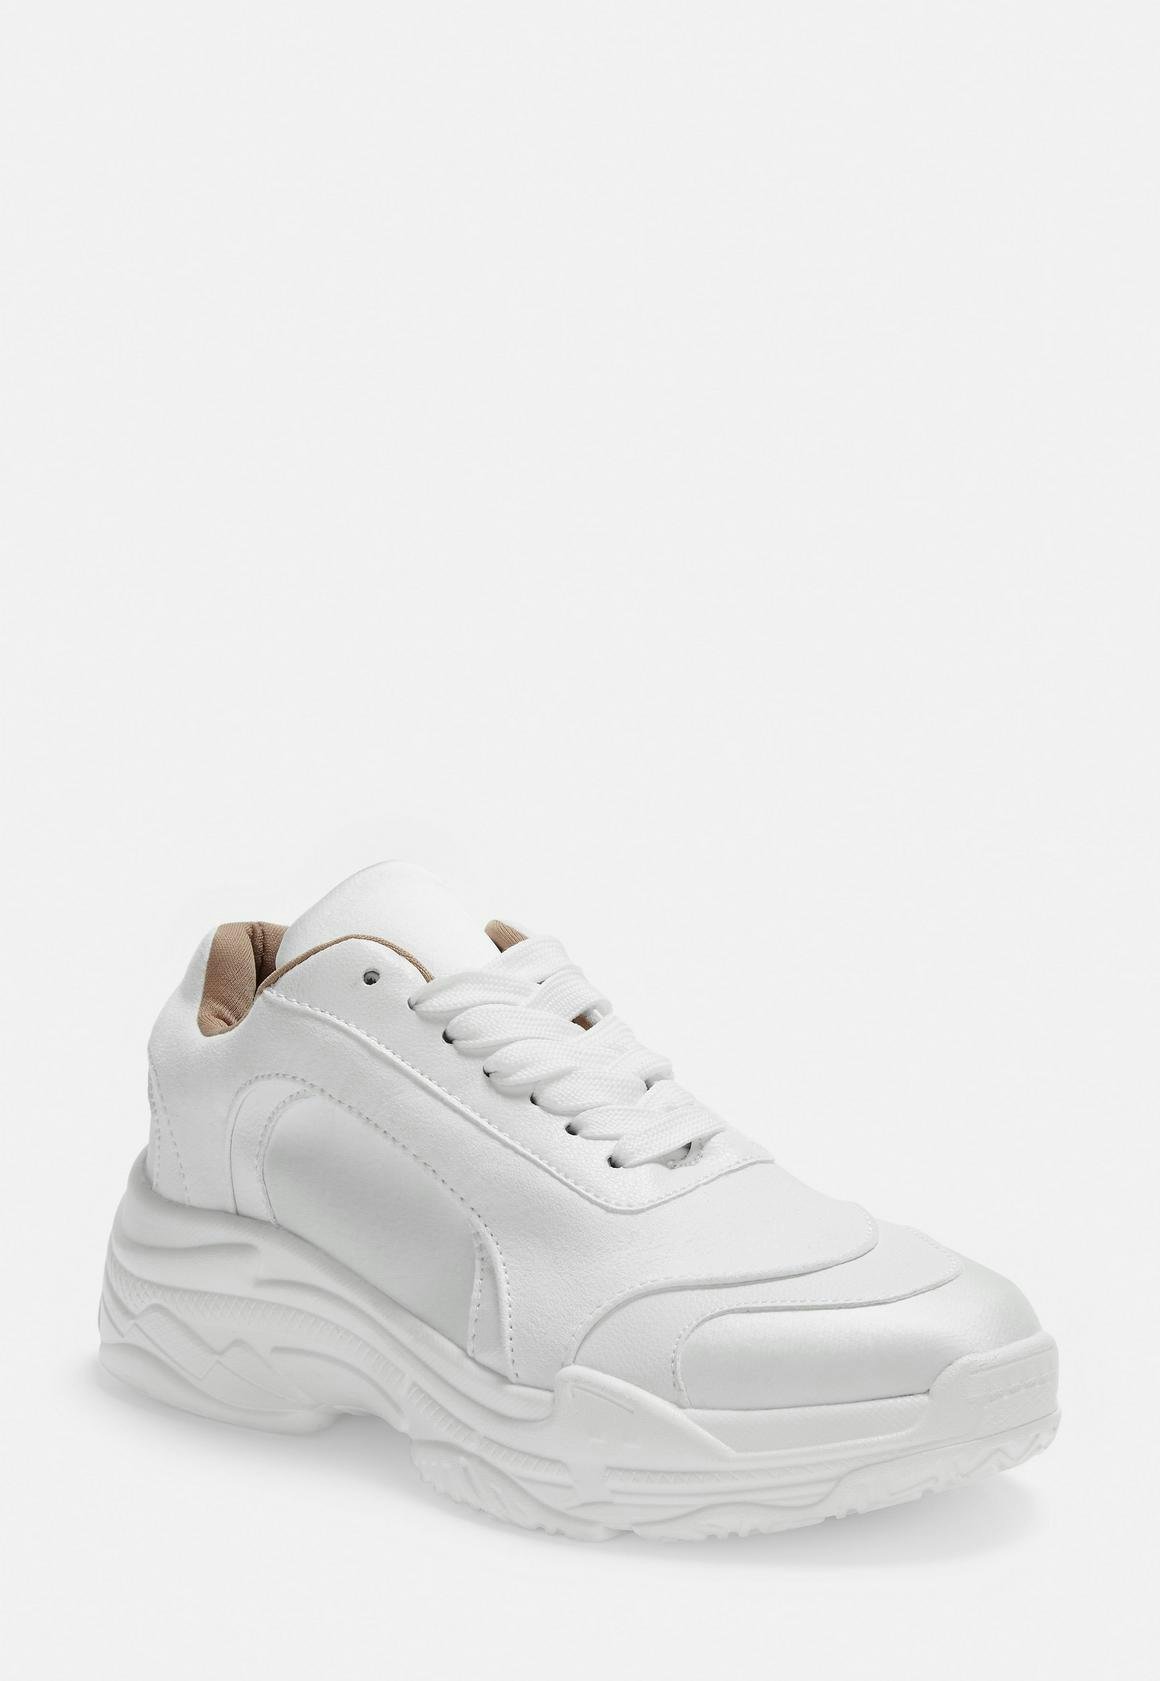 budget chunky sneakers